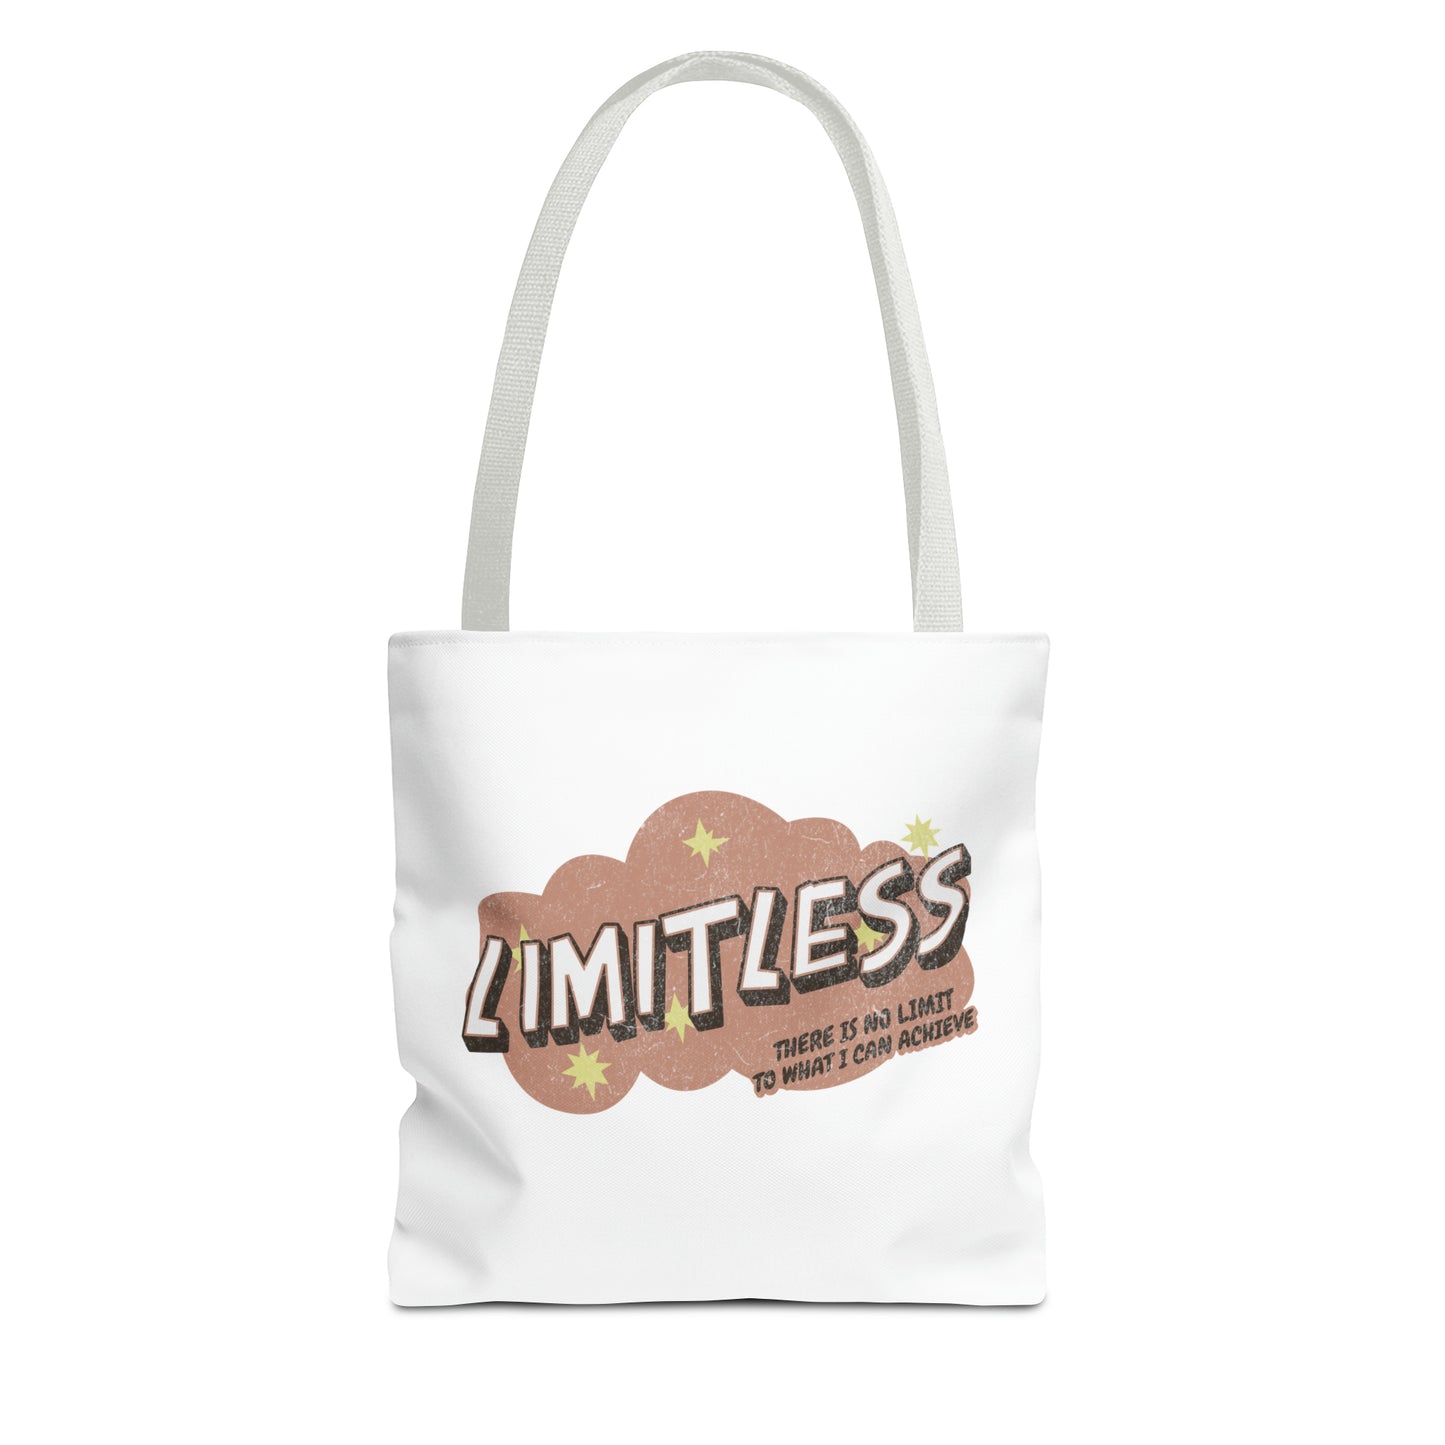 "Limitless Tote"